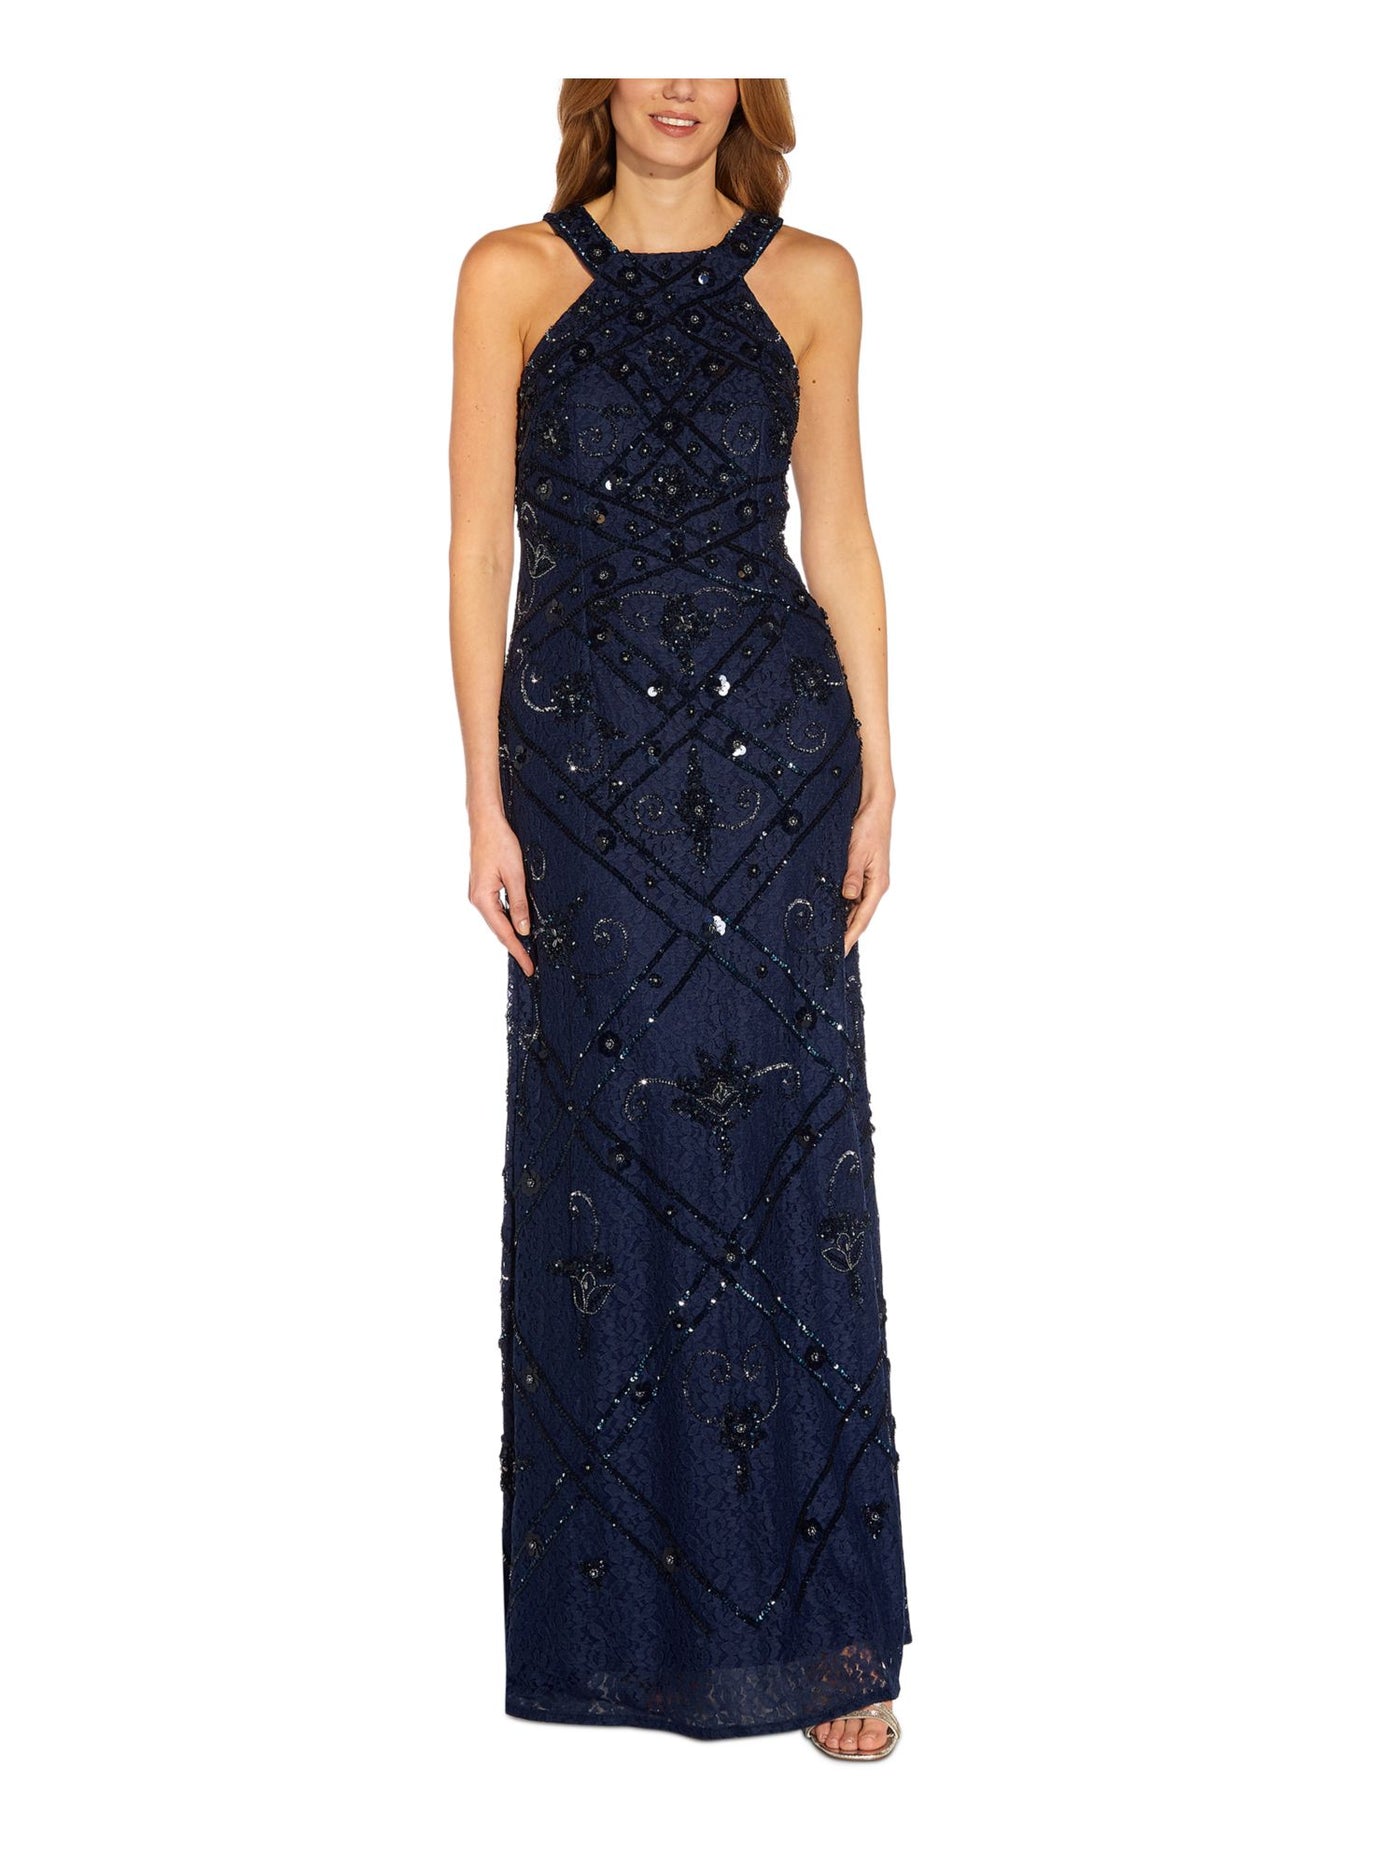 ADRIANNA PAPELL Womens Navy Sequined Zippered Lined Floral Sleeveless Halter Maxi Cocktail Gown Dress 2